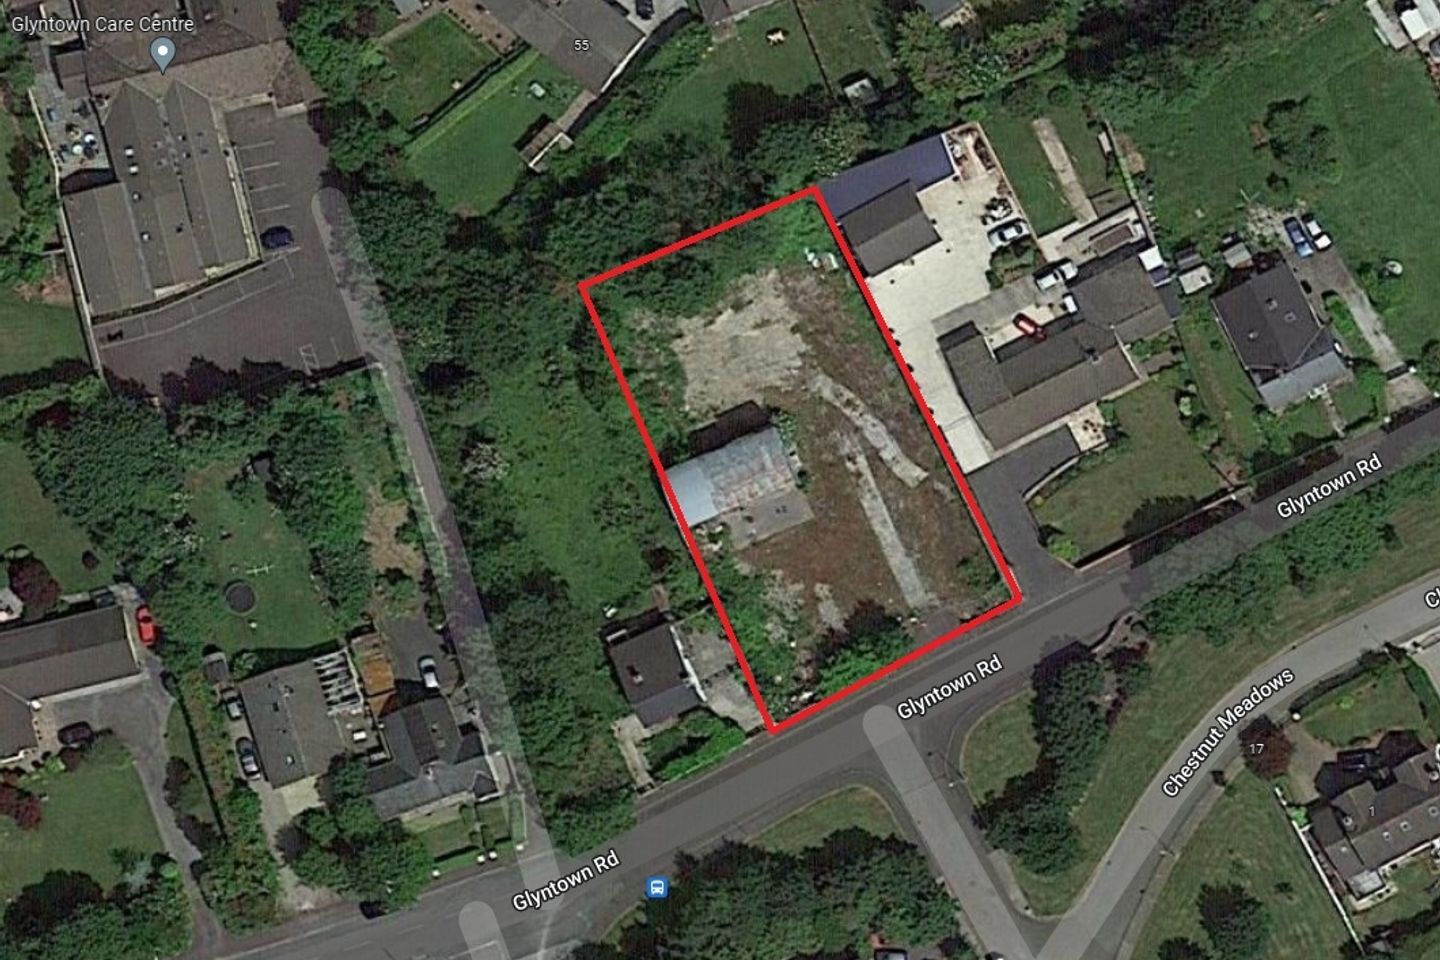 Site at Glyntown Road, Glanmire, Co. Cork